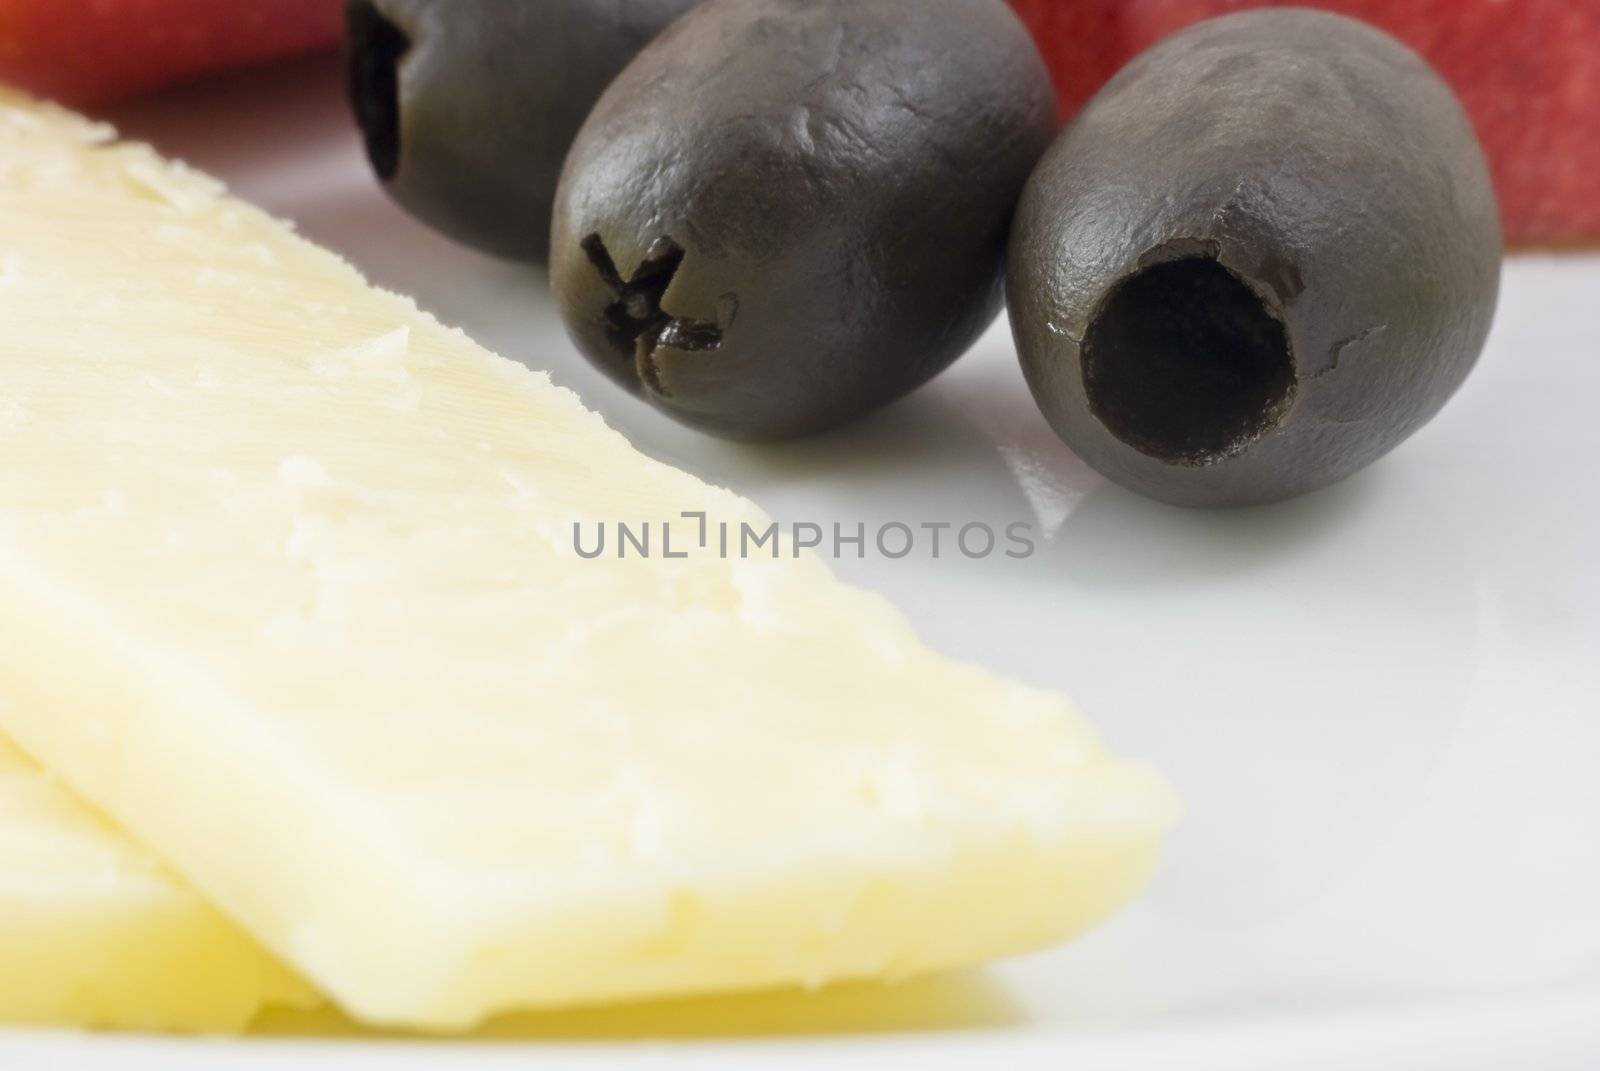 Macro shot of cheddar cheese and olives on a white plate.  Red apple just visible in the background.